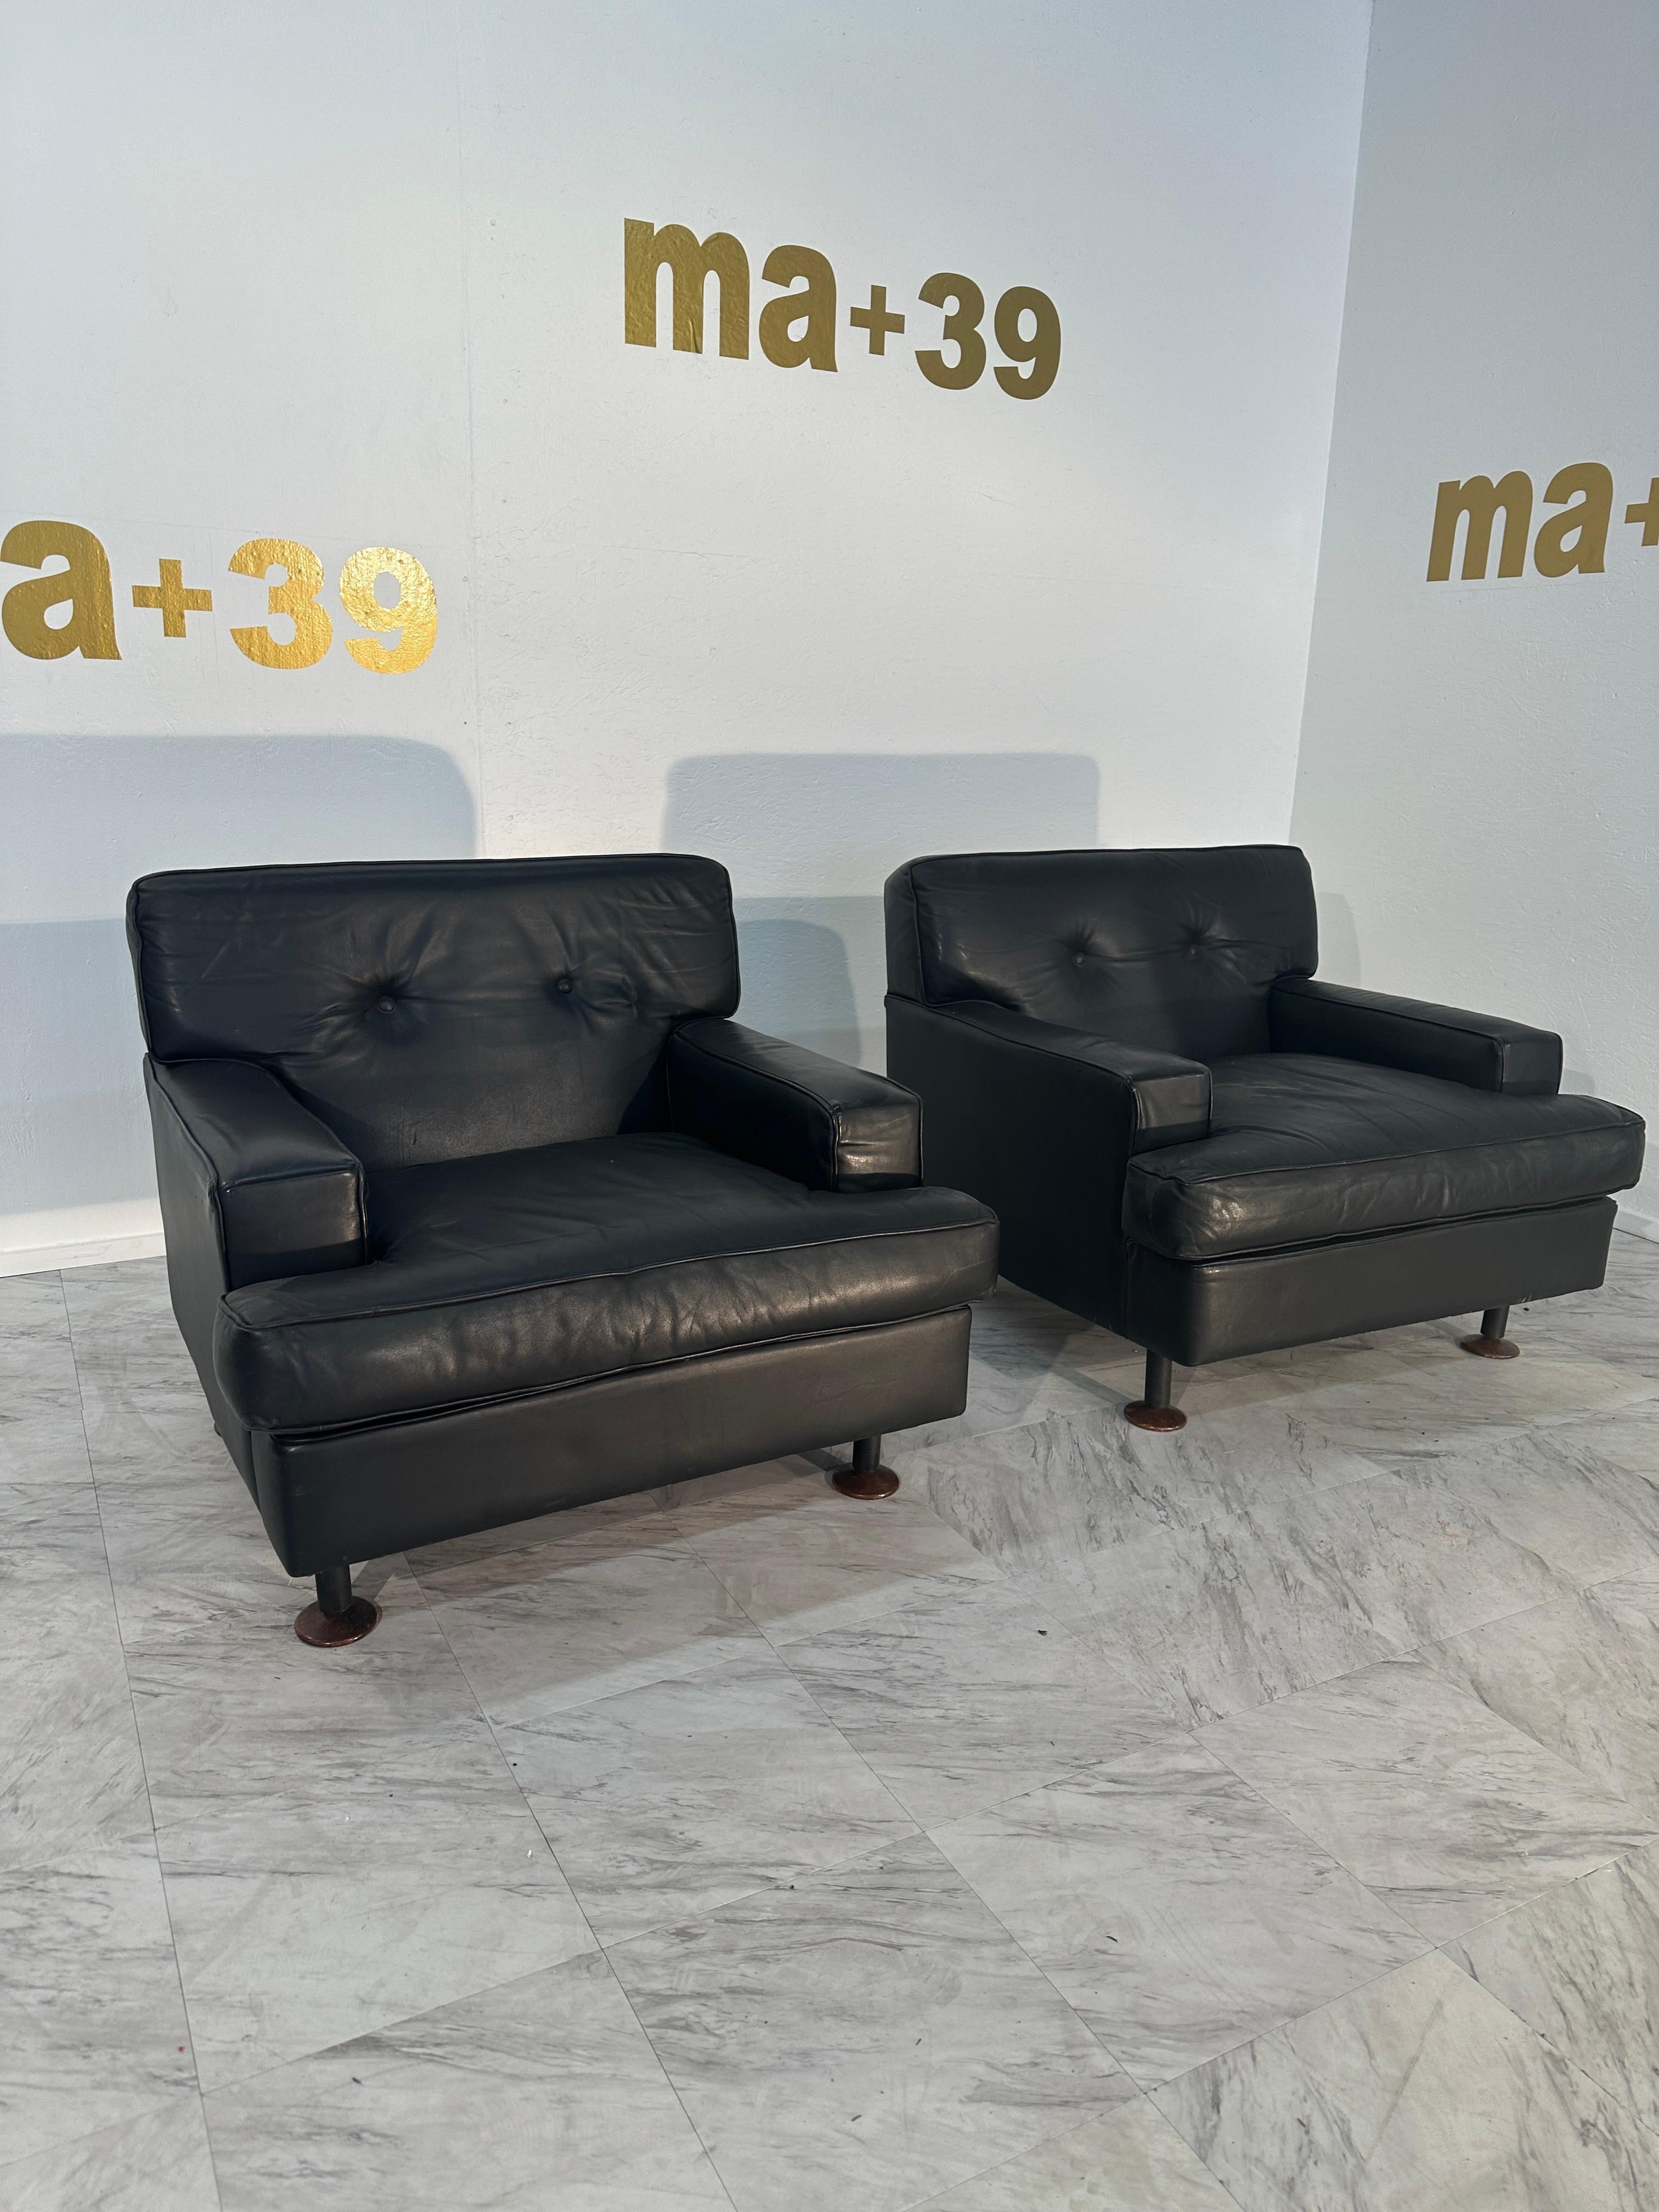 The Pair of 2 Mid Century Italian Lounge Chairs by Zanuso X Artflex, dating back to the 1960s, are exceptional pieces of furniture. Crafted with a distinctive midcentury design, these lounge chairs feature sleek lines and a timeless aesthetic. The